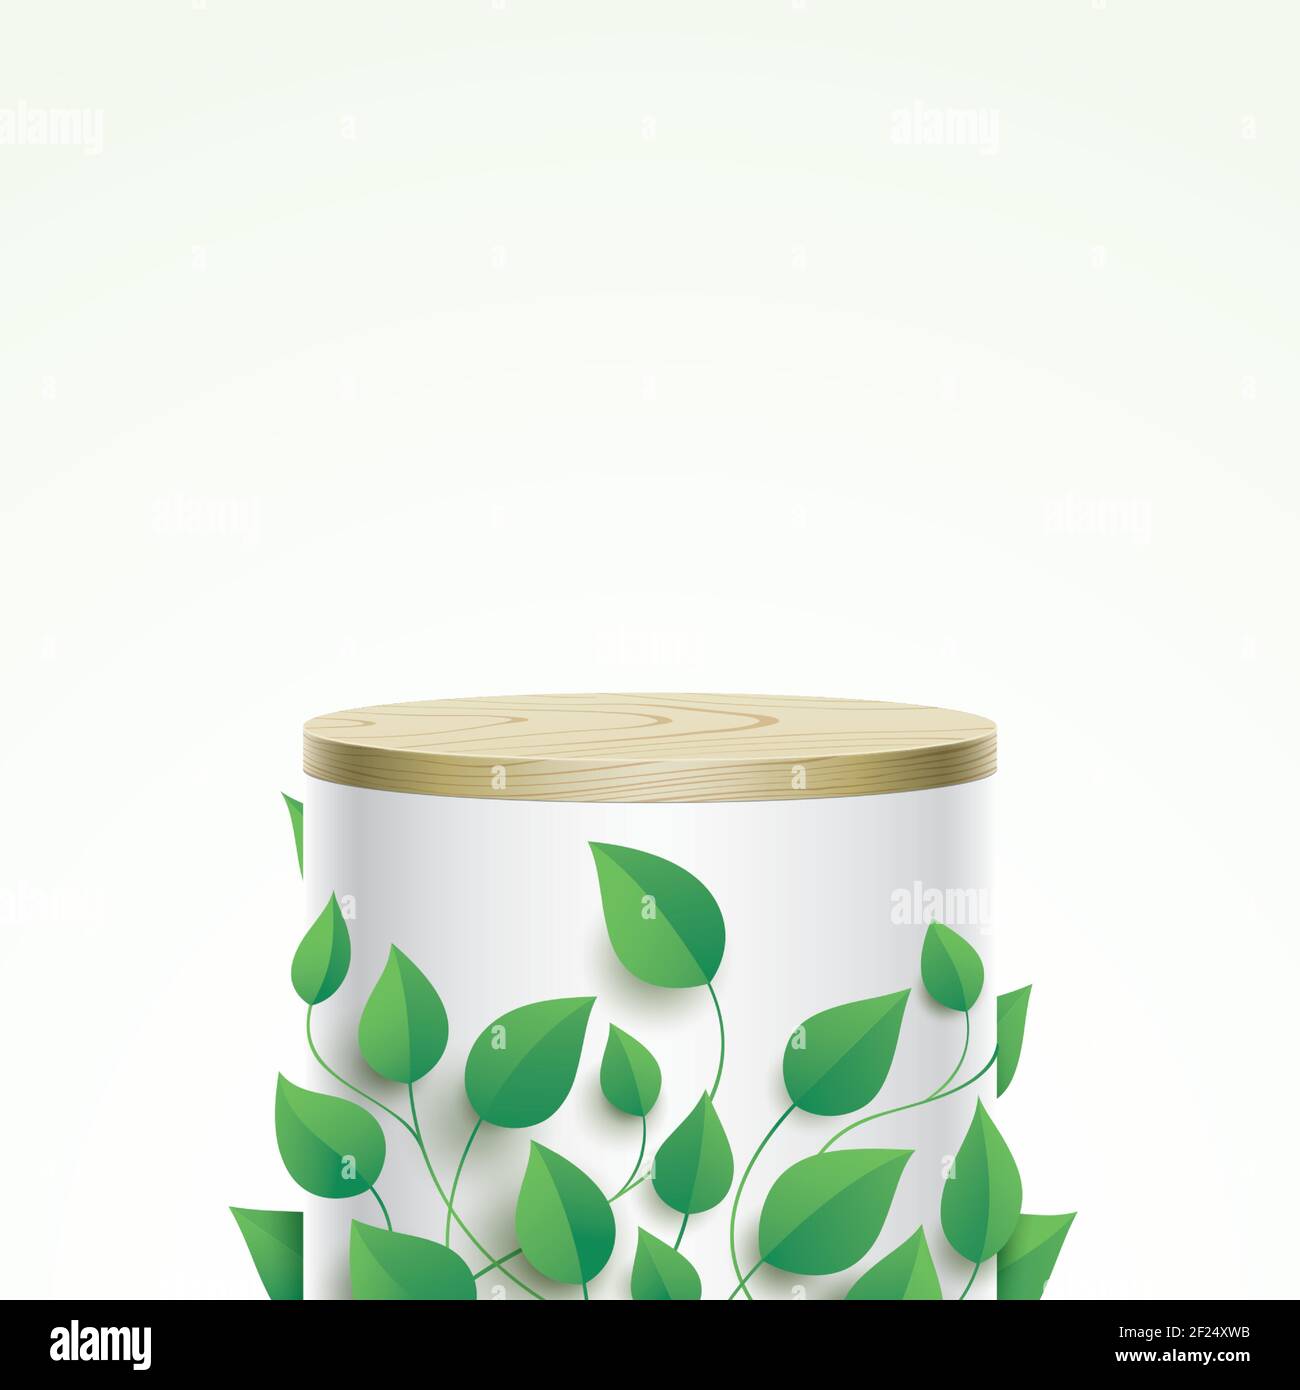 An abstract ecological scene with tube shape display stage covered with green leaves. Oval form aesthetic white column with wooden cover, and free space for an object, product, or text placement. Stock Vector